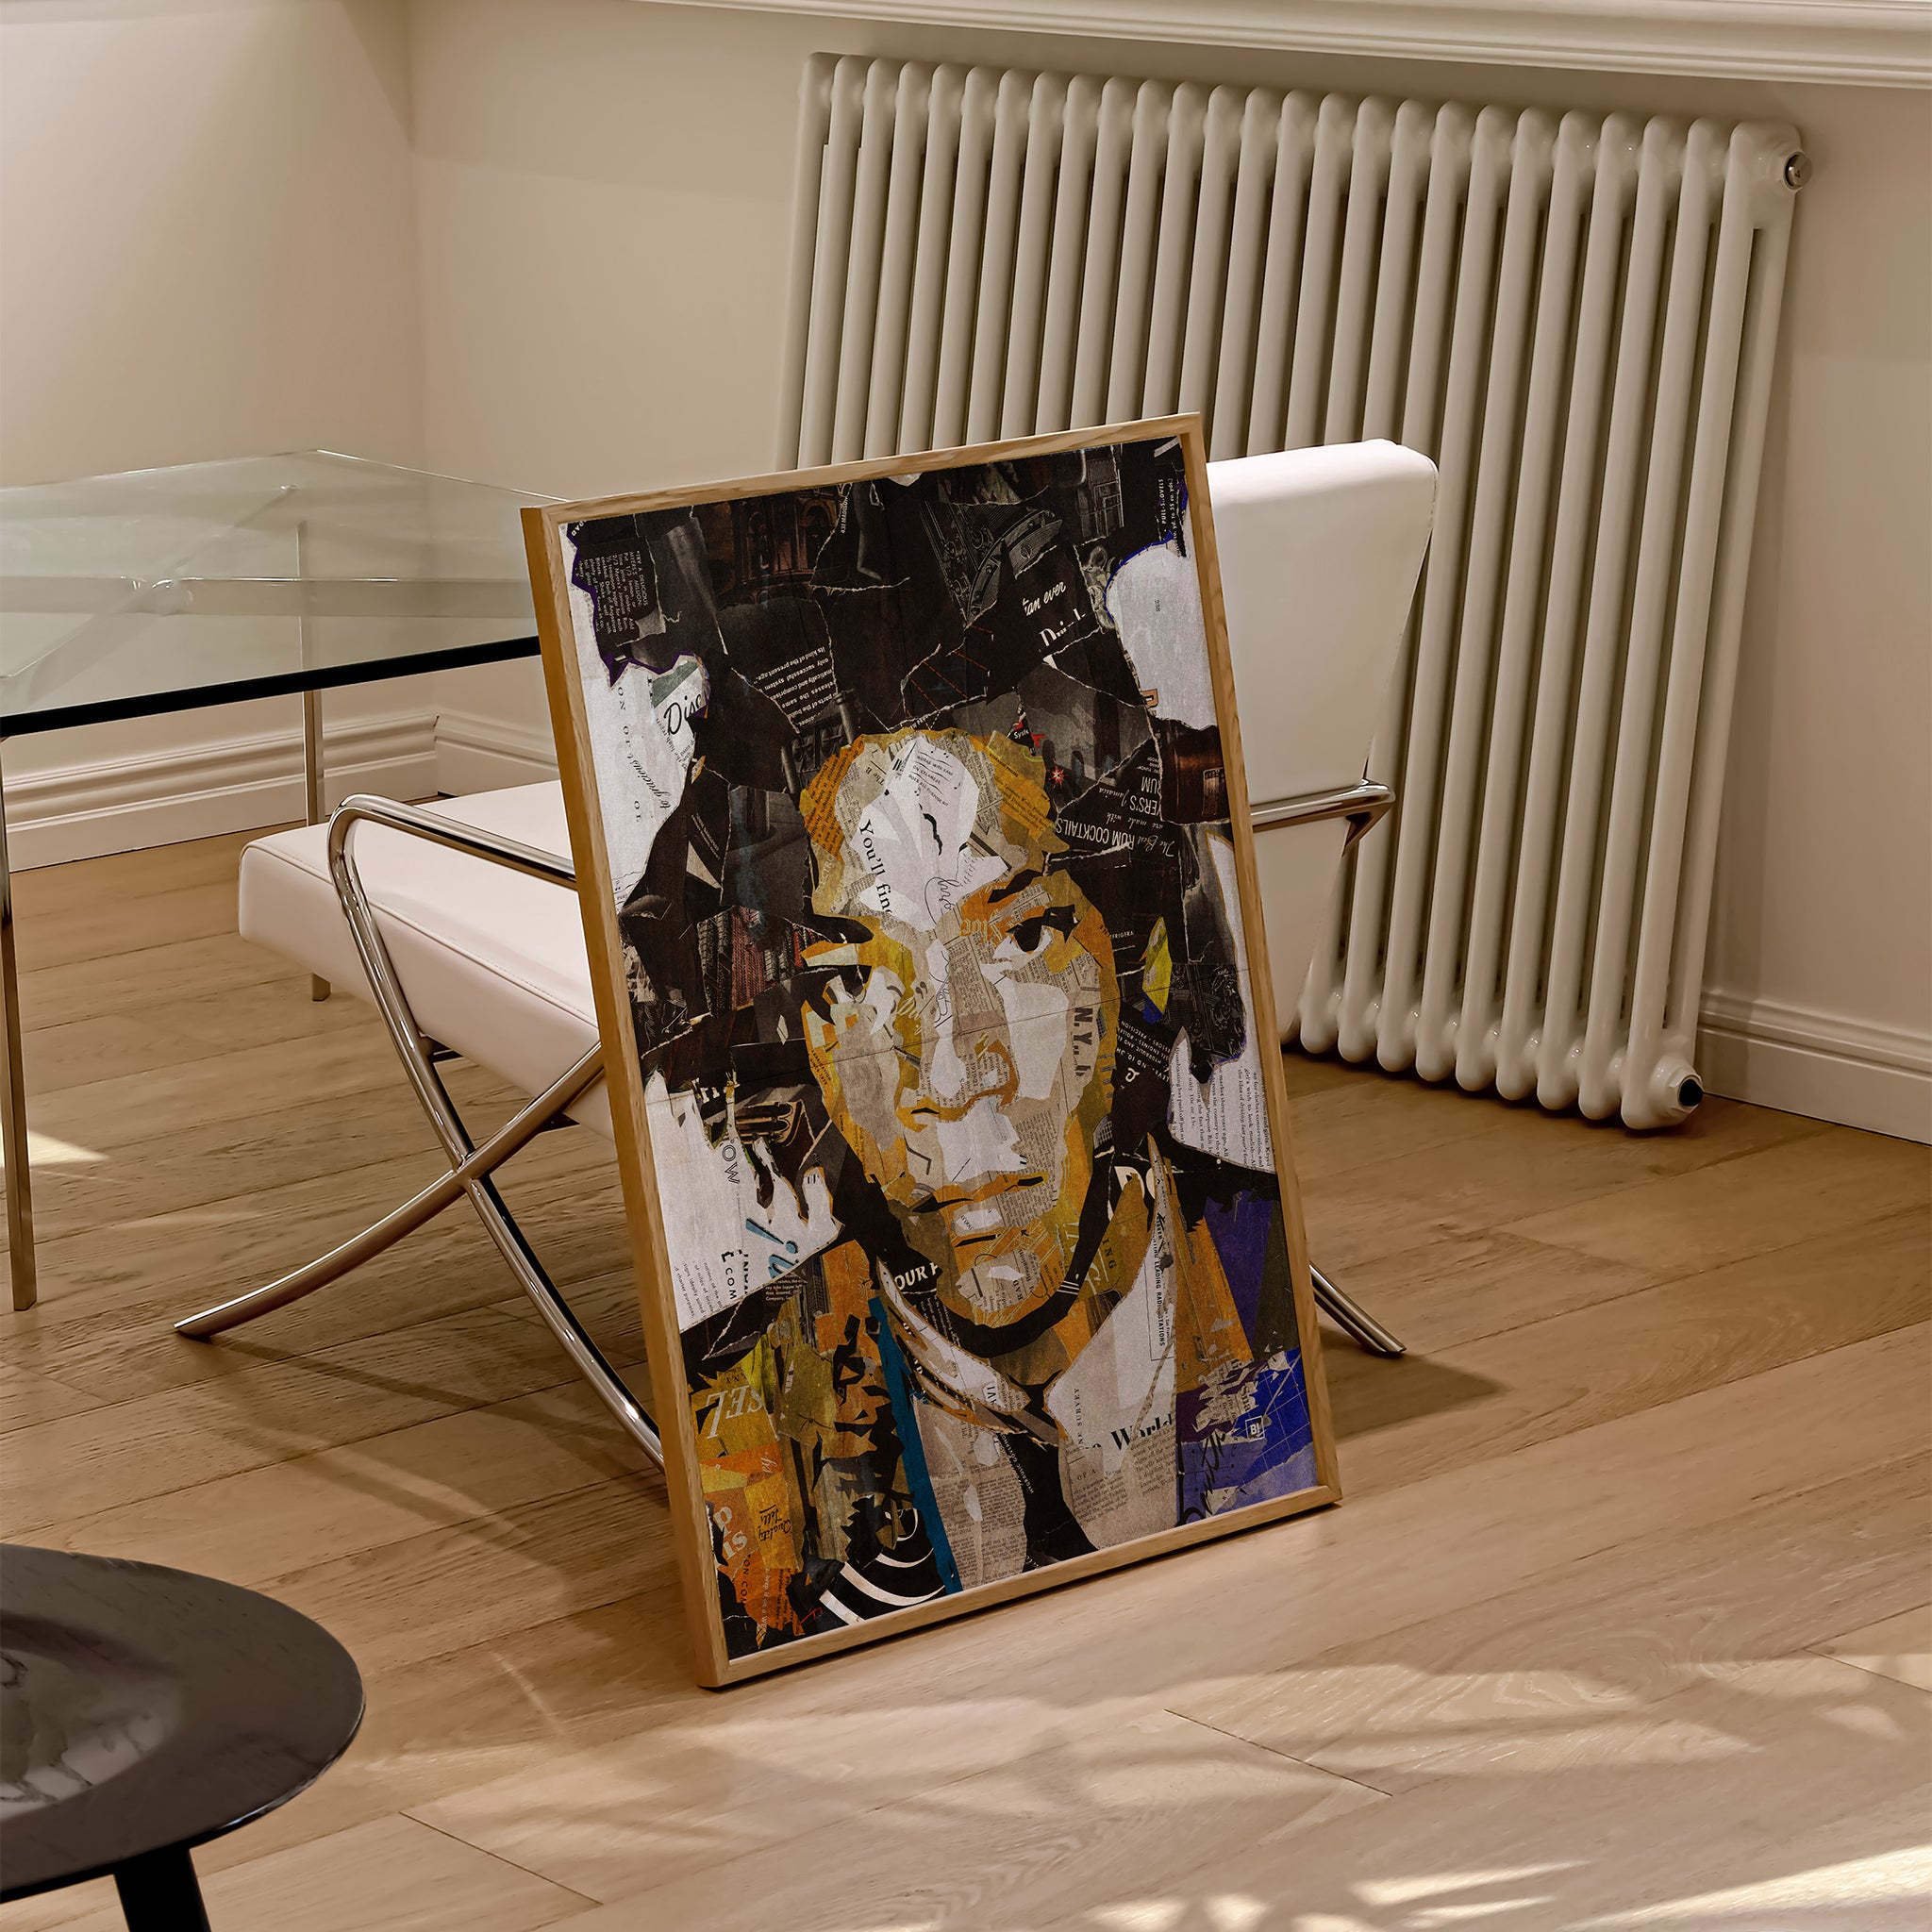 Be inspired by our iconic collage portrait art print of Jean-Michel Basquiat. This artwork was printed using the giclée process on archival acid-free paper and is presented in a natural oak frame, capturing its timeless beauty in every detail.